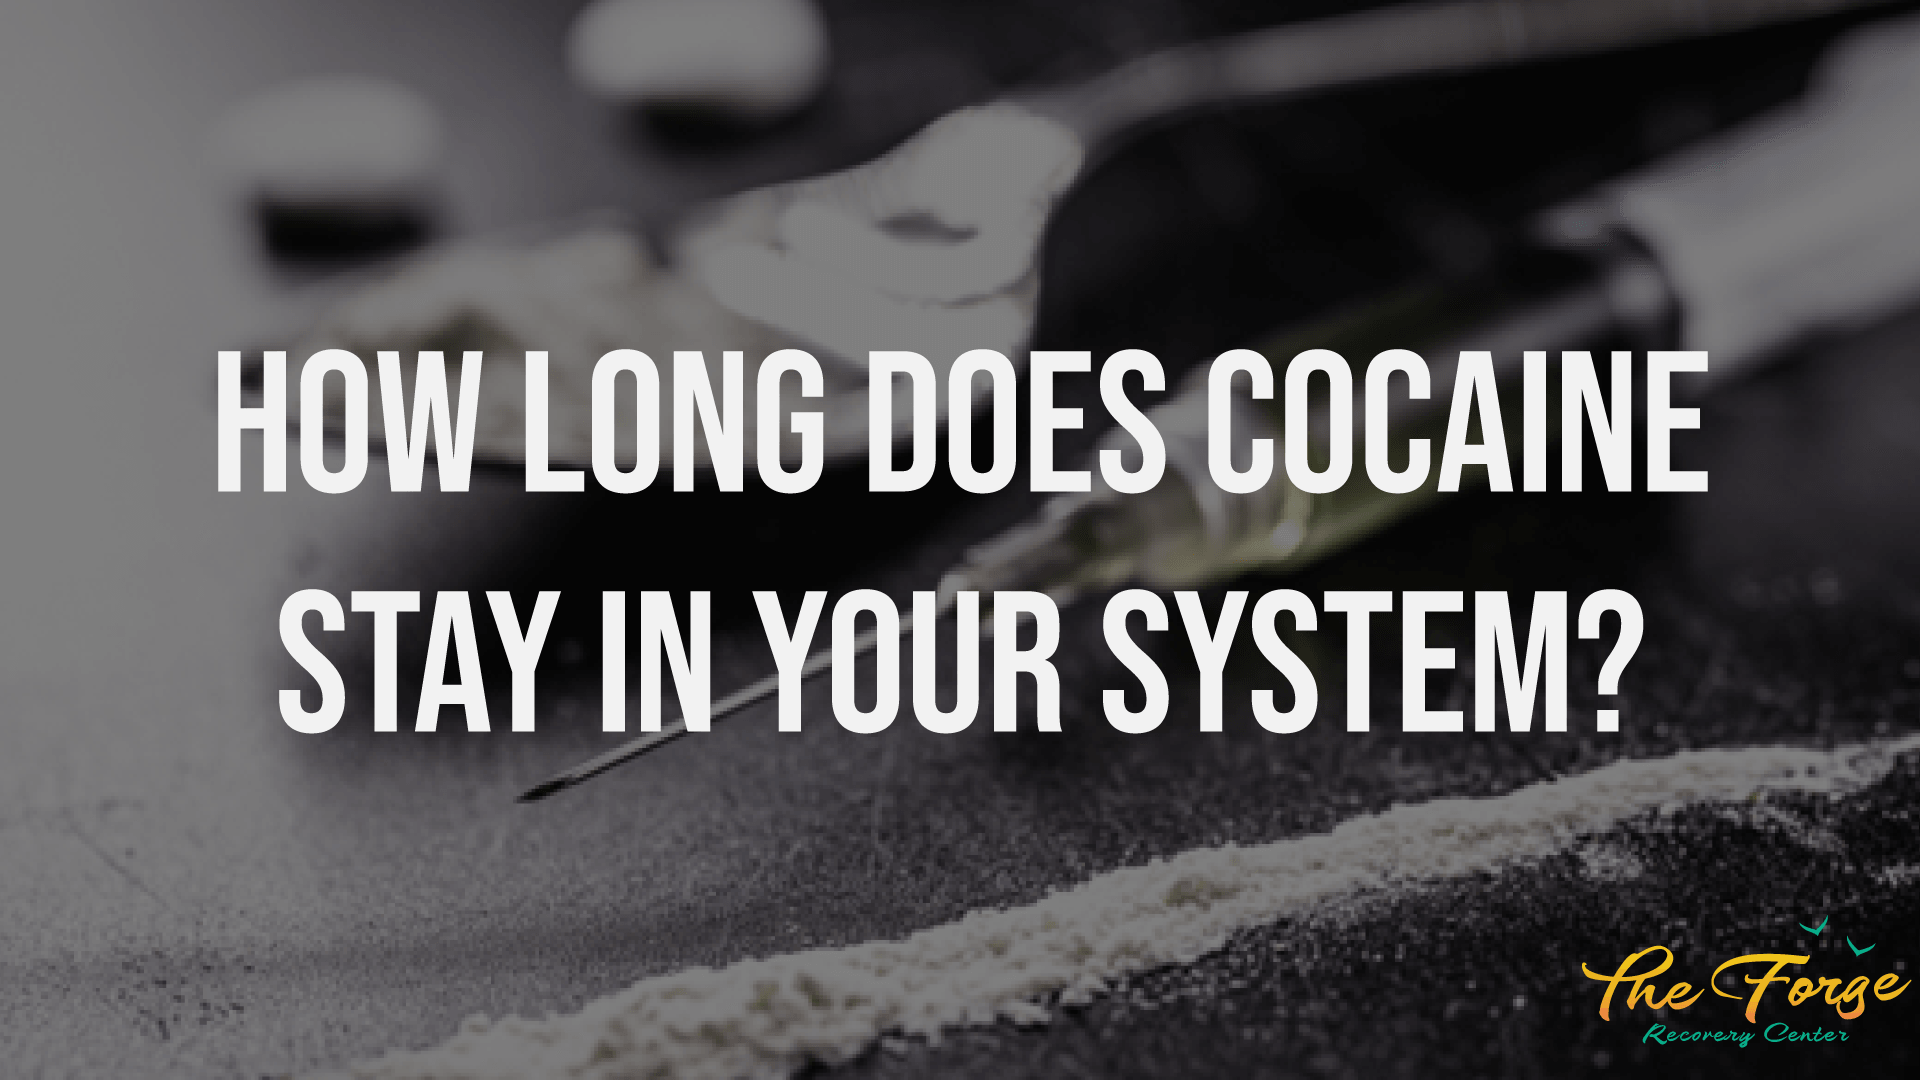 Cocaine: How Long Does Cocaine Stay in Your System & More